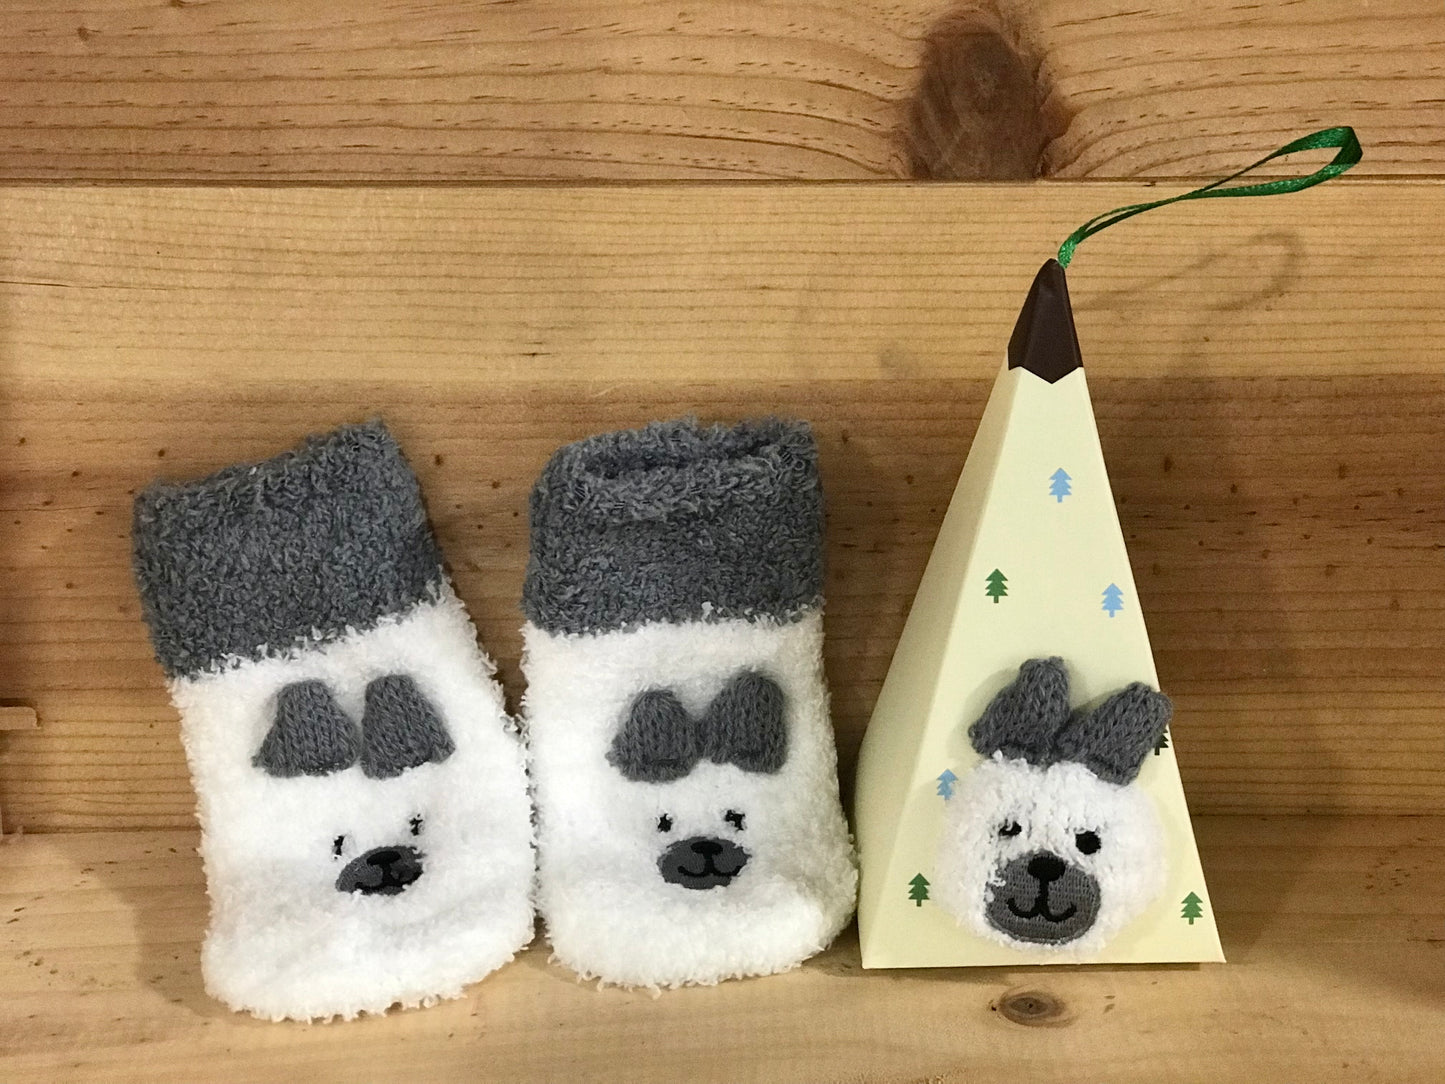 Baby Polar Bear Socks in a Box for Toddlers